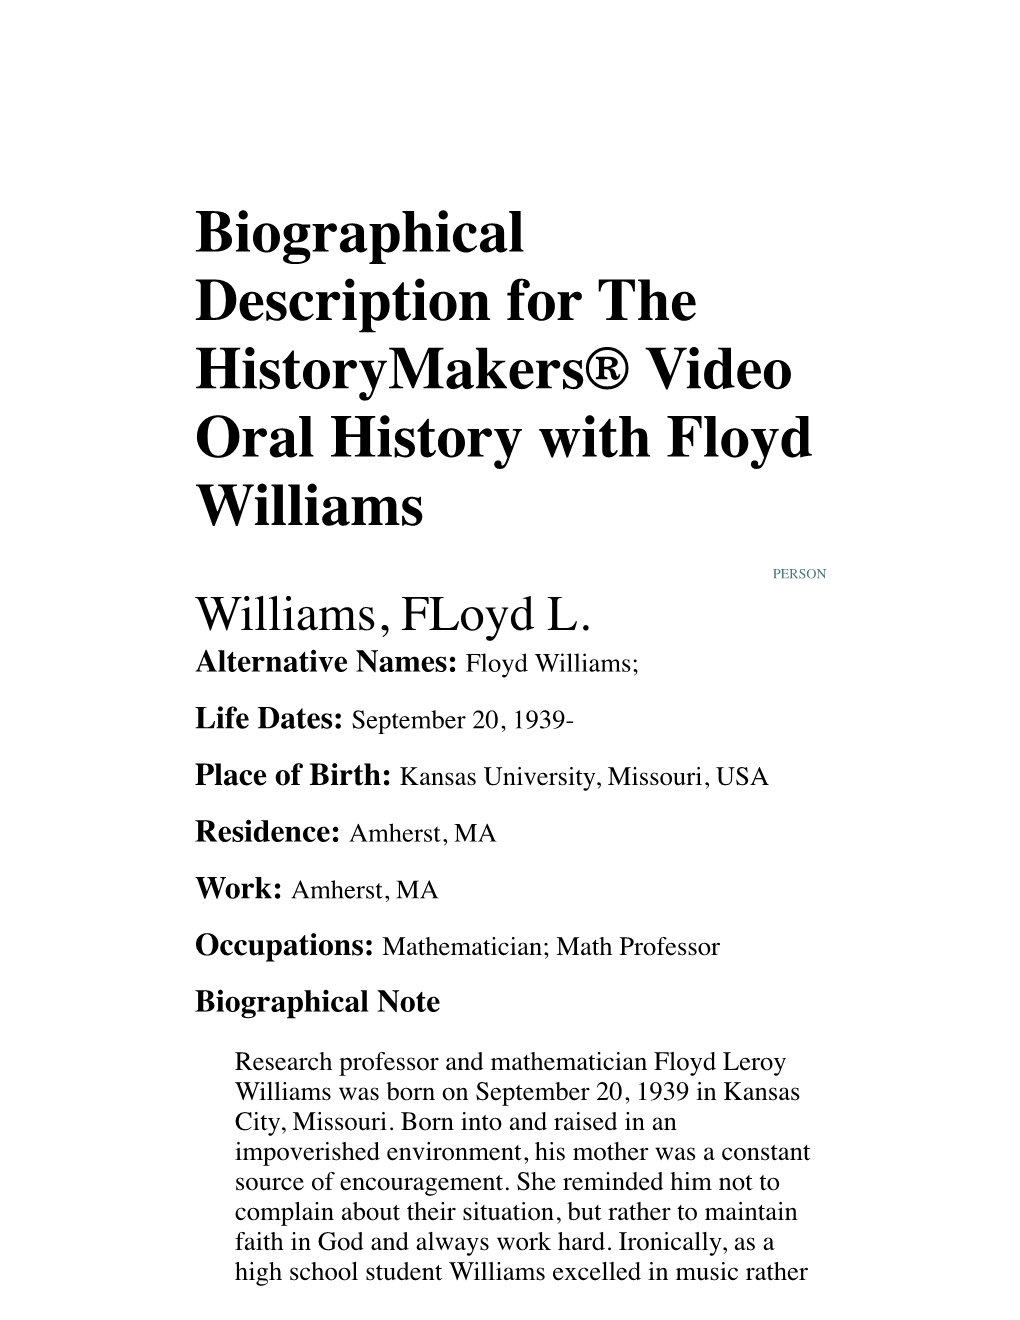 Biographical Description for the Historymakers® Video Oral History with Floyd Williams